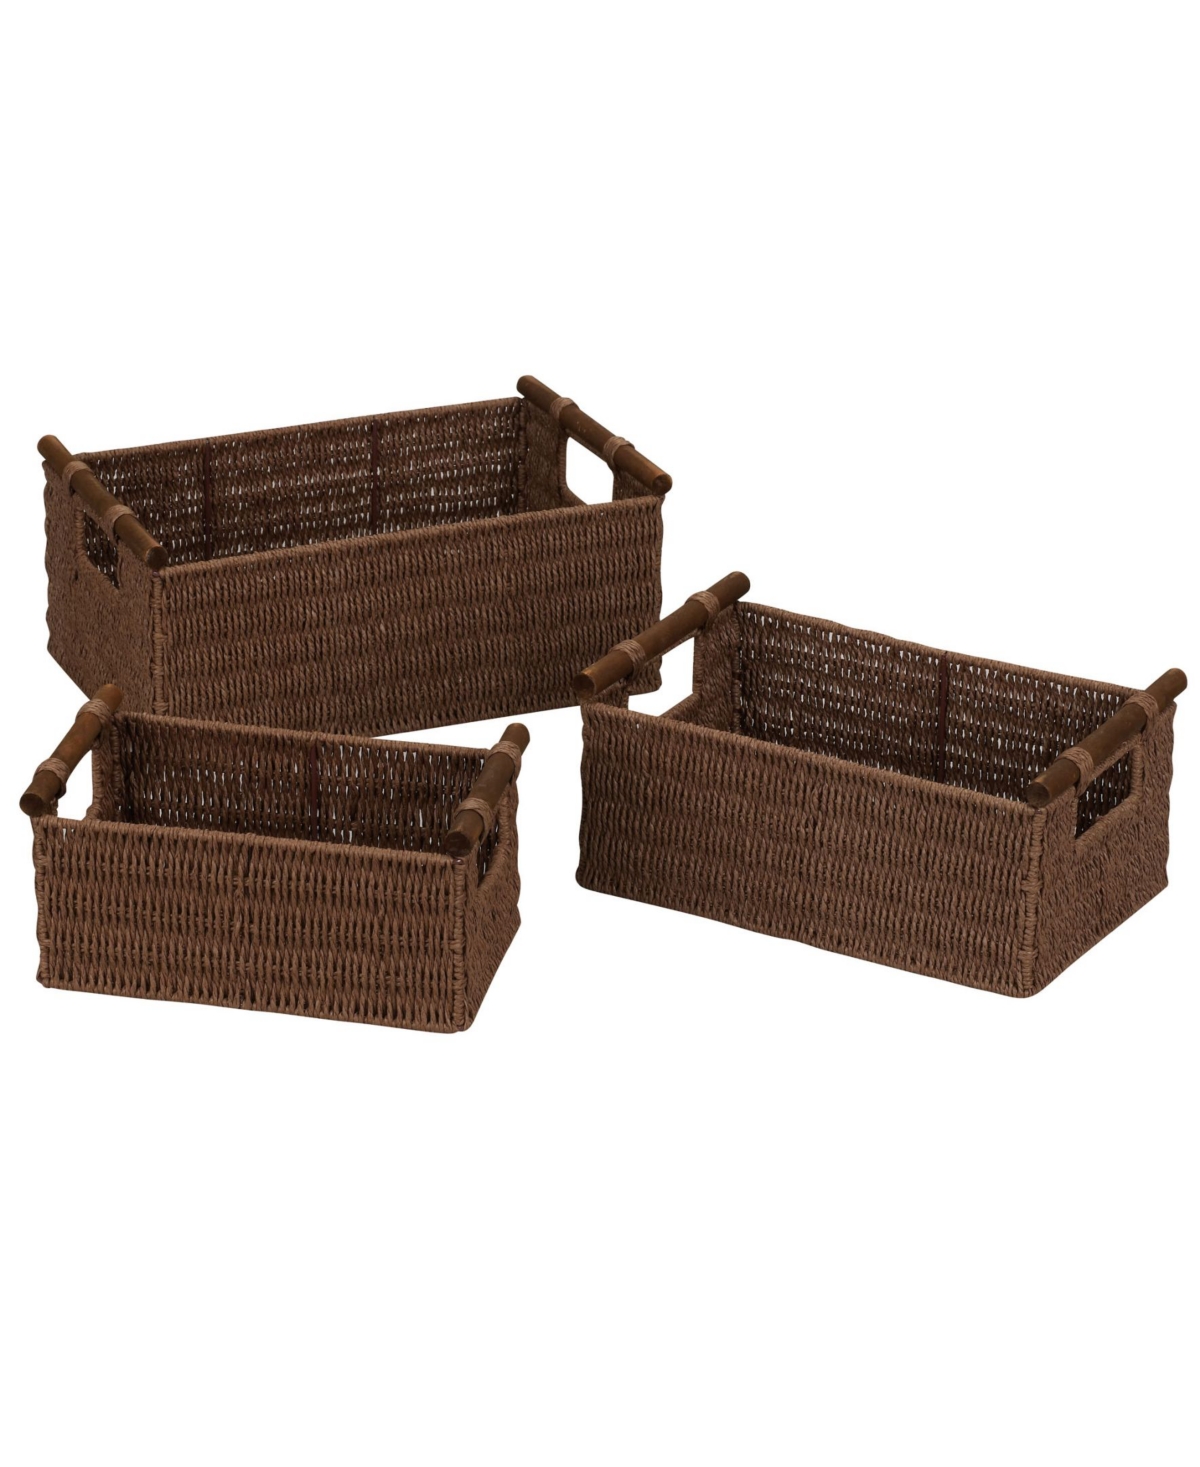 Baskets with Wood Handles, Set of 6 - Brown